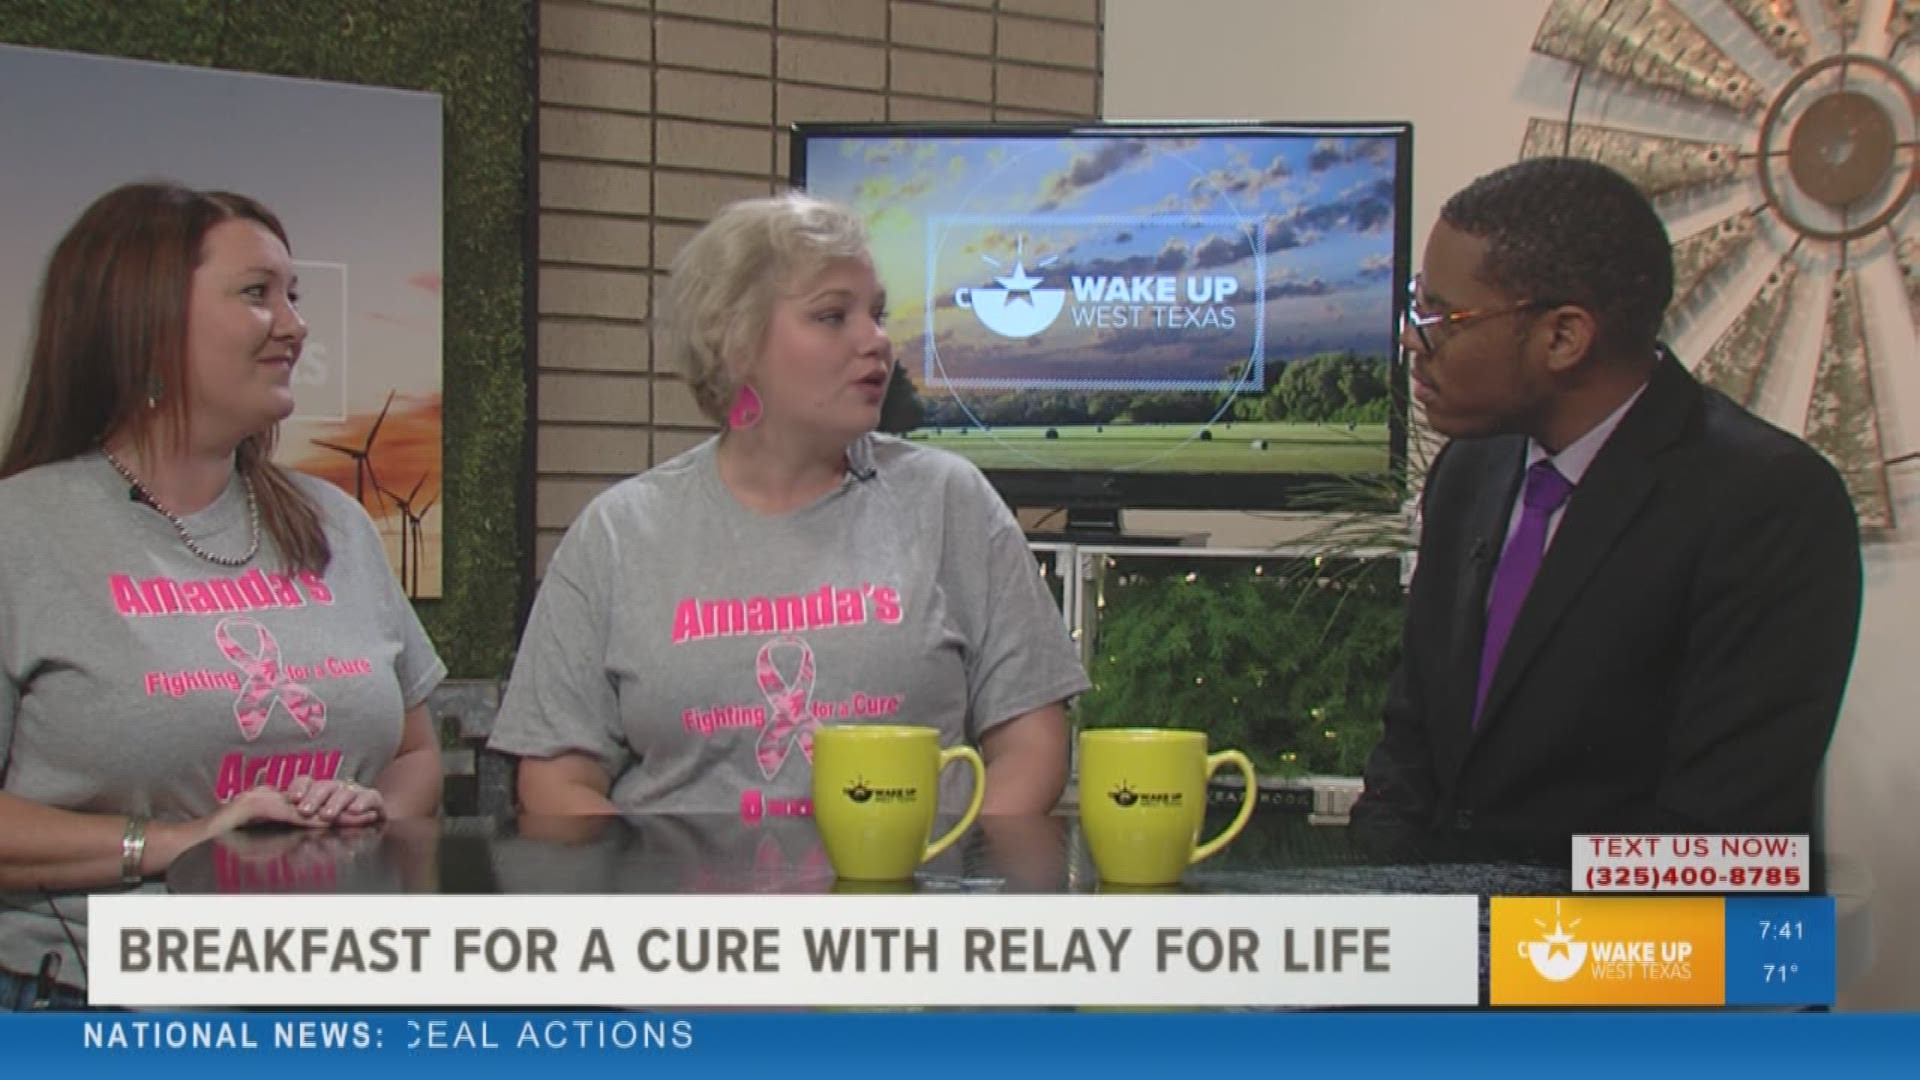 Our Malik Mingo spoke with two representatives about "Breakfast for a Cure," a fundraiser for the American Cancer Society on October 4 at Schneider Distributing Co.